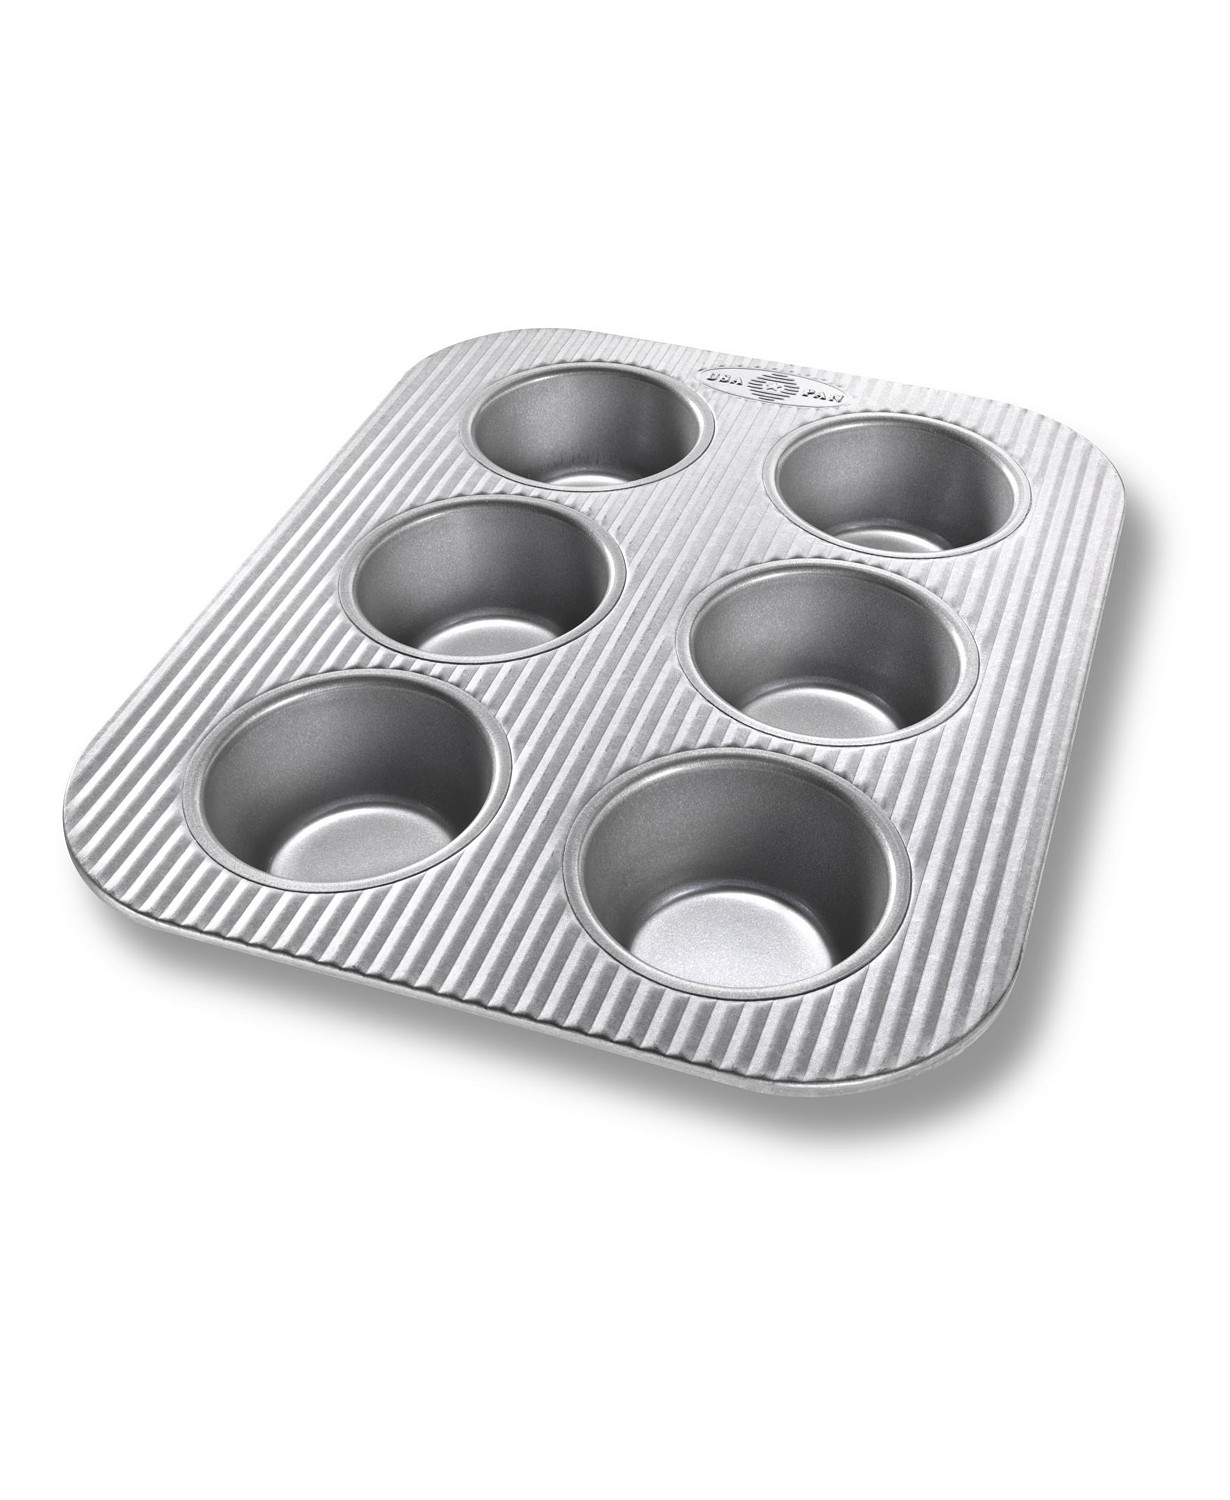 Toaster Oven Muffin Pan, 6 Well